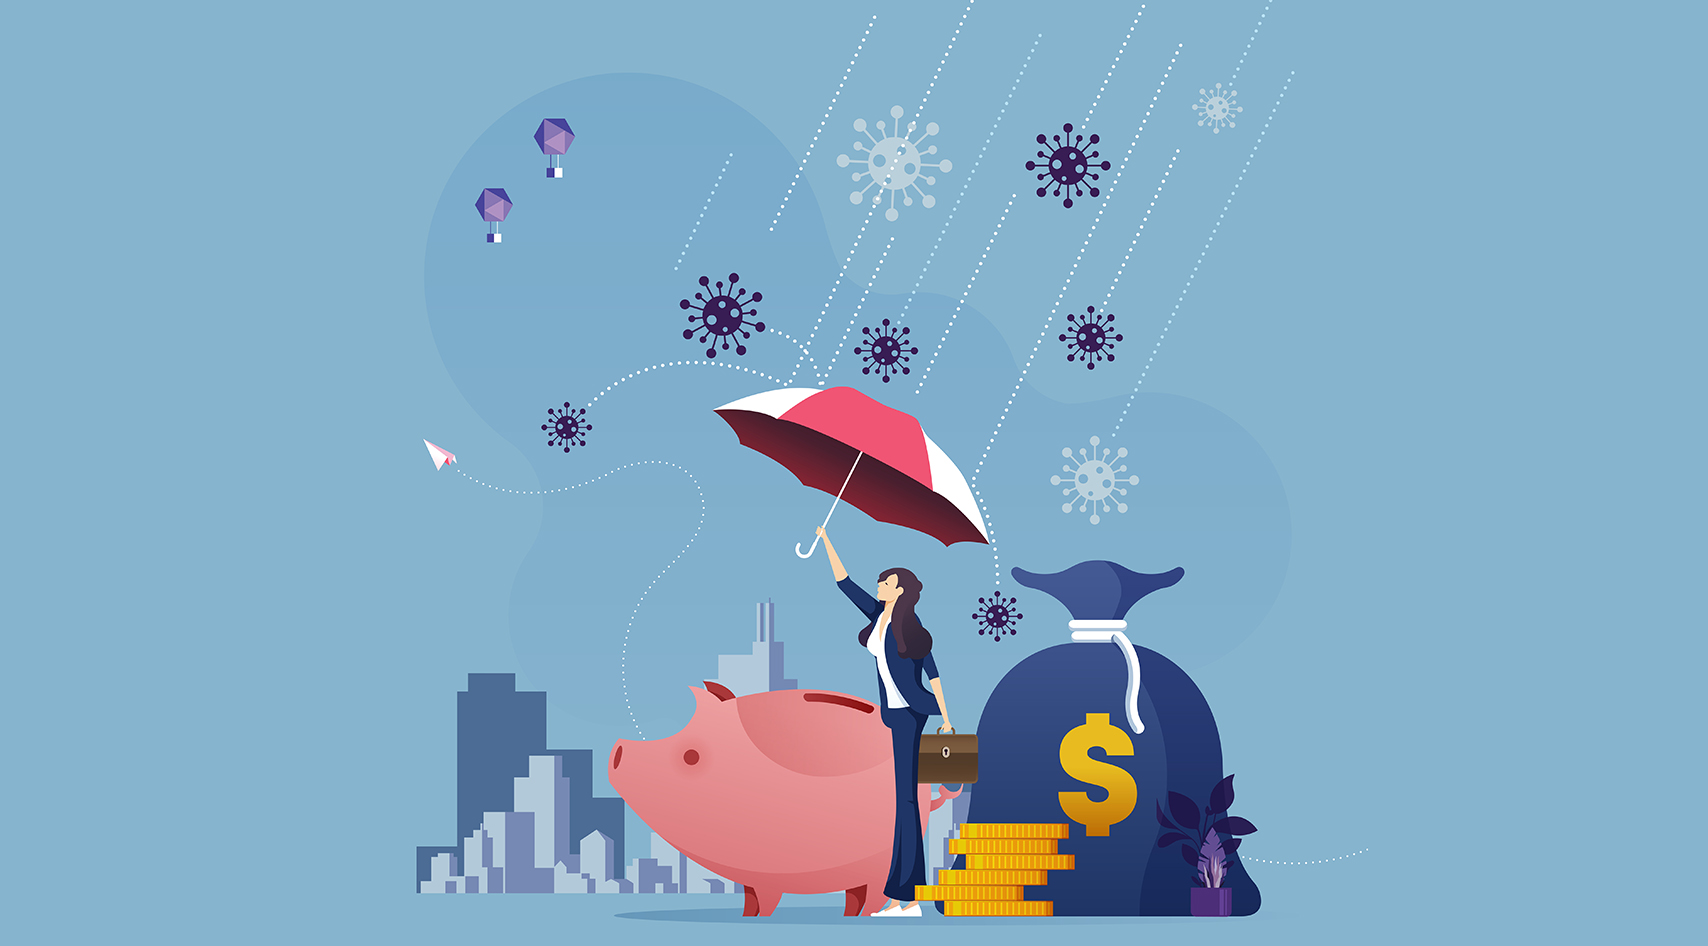 Businesswoman with umbrella protecting money from corona virus attack-Business financial crisis concept